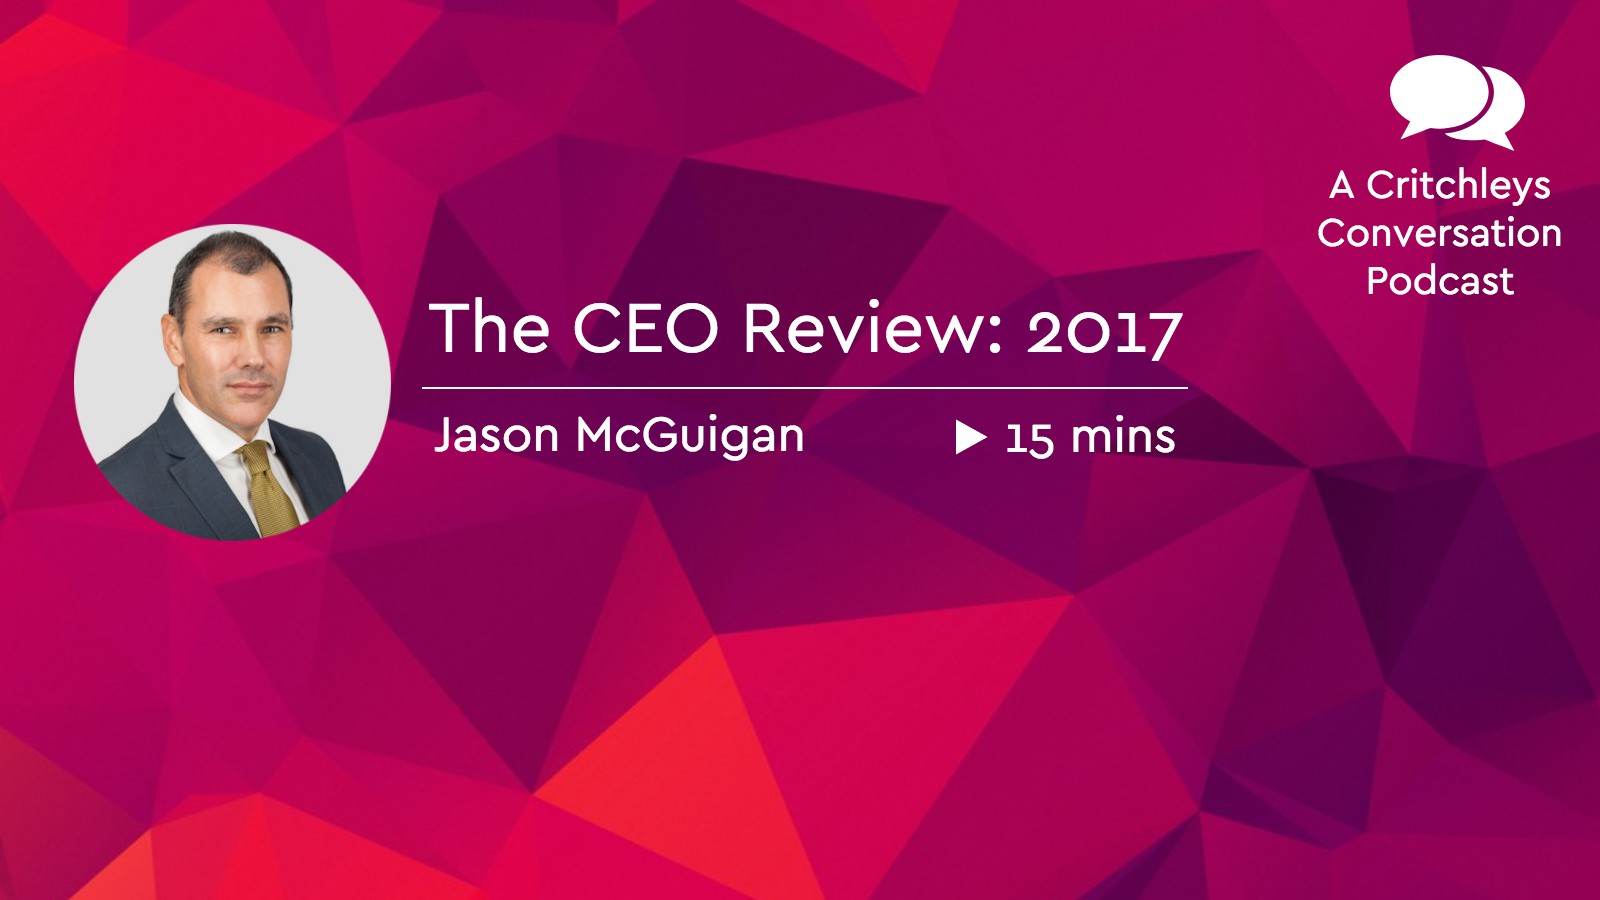 The CEO Review of 2017